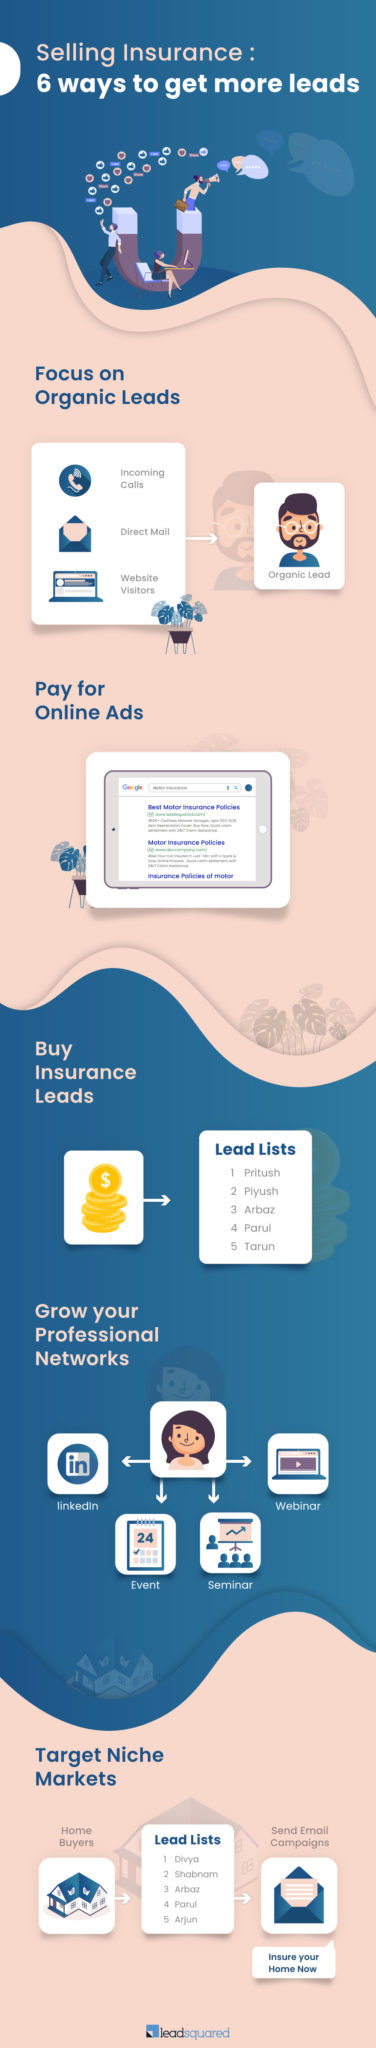 selling insurance - infographic